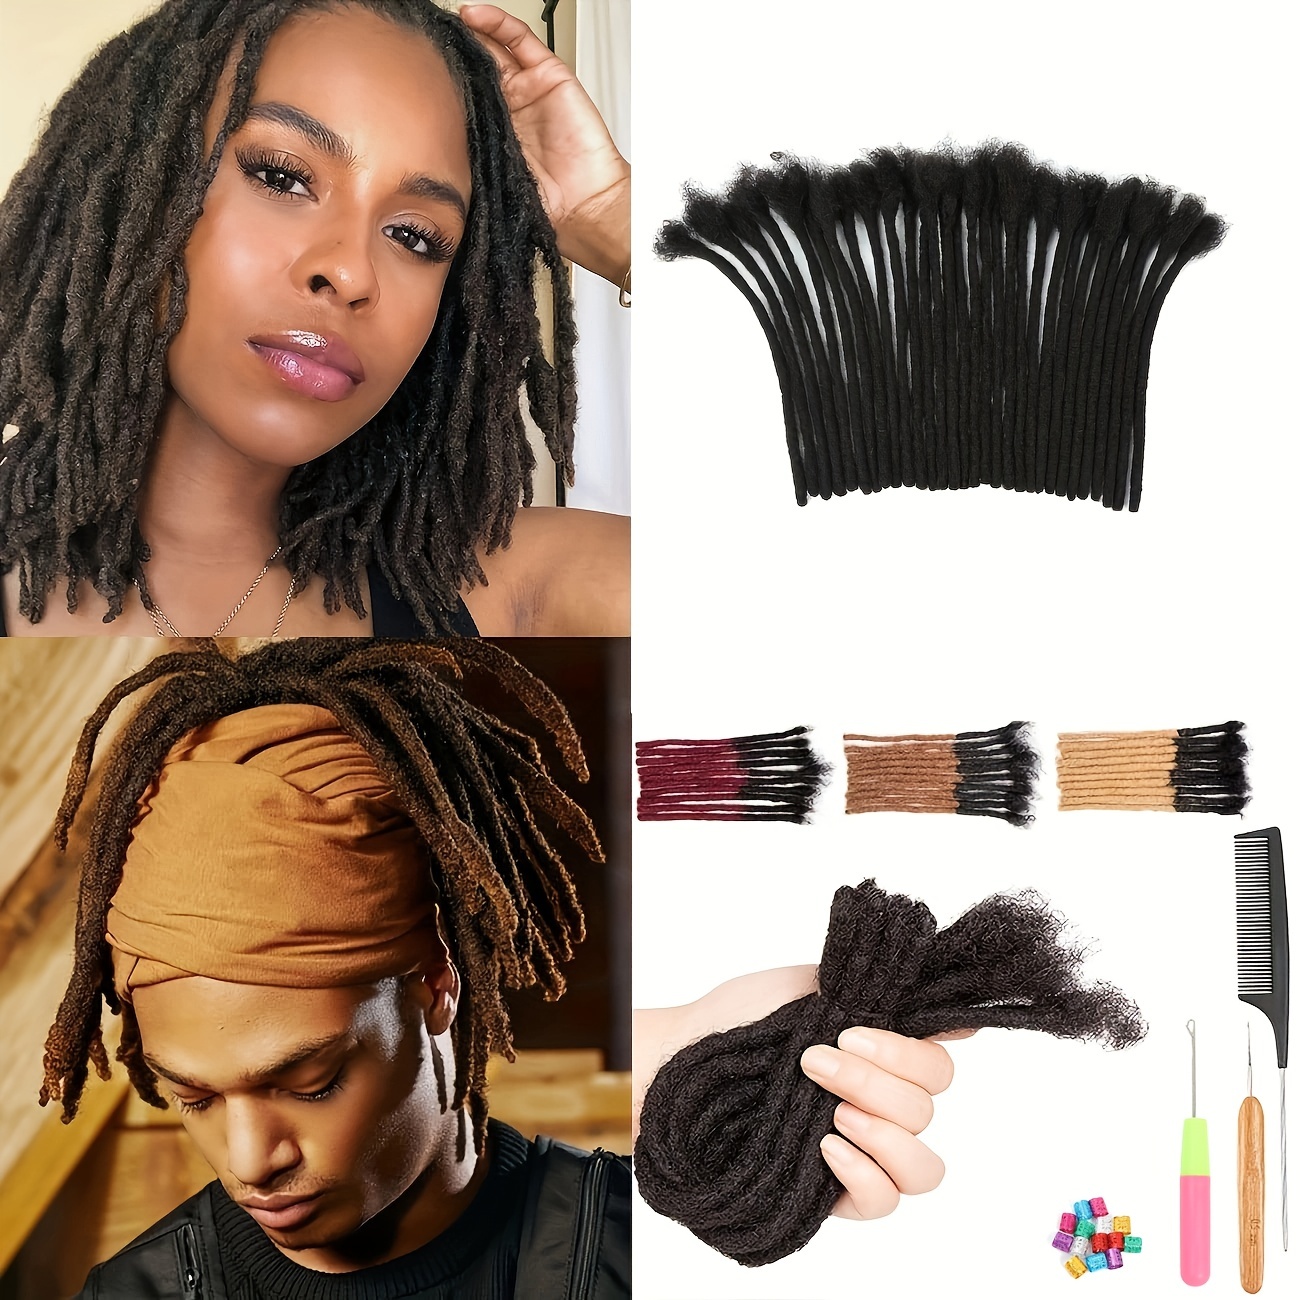 Dreadlocks Tool Sets,Crochet Needle for Dreadlocks,Crochet Sisterlock  Retighten Tool,Dreadlocks Hair Extensions Locs,Tightening Accessories Hair